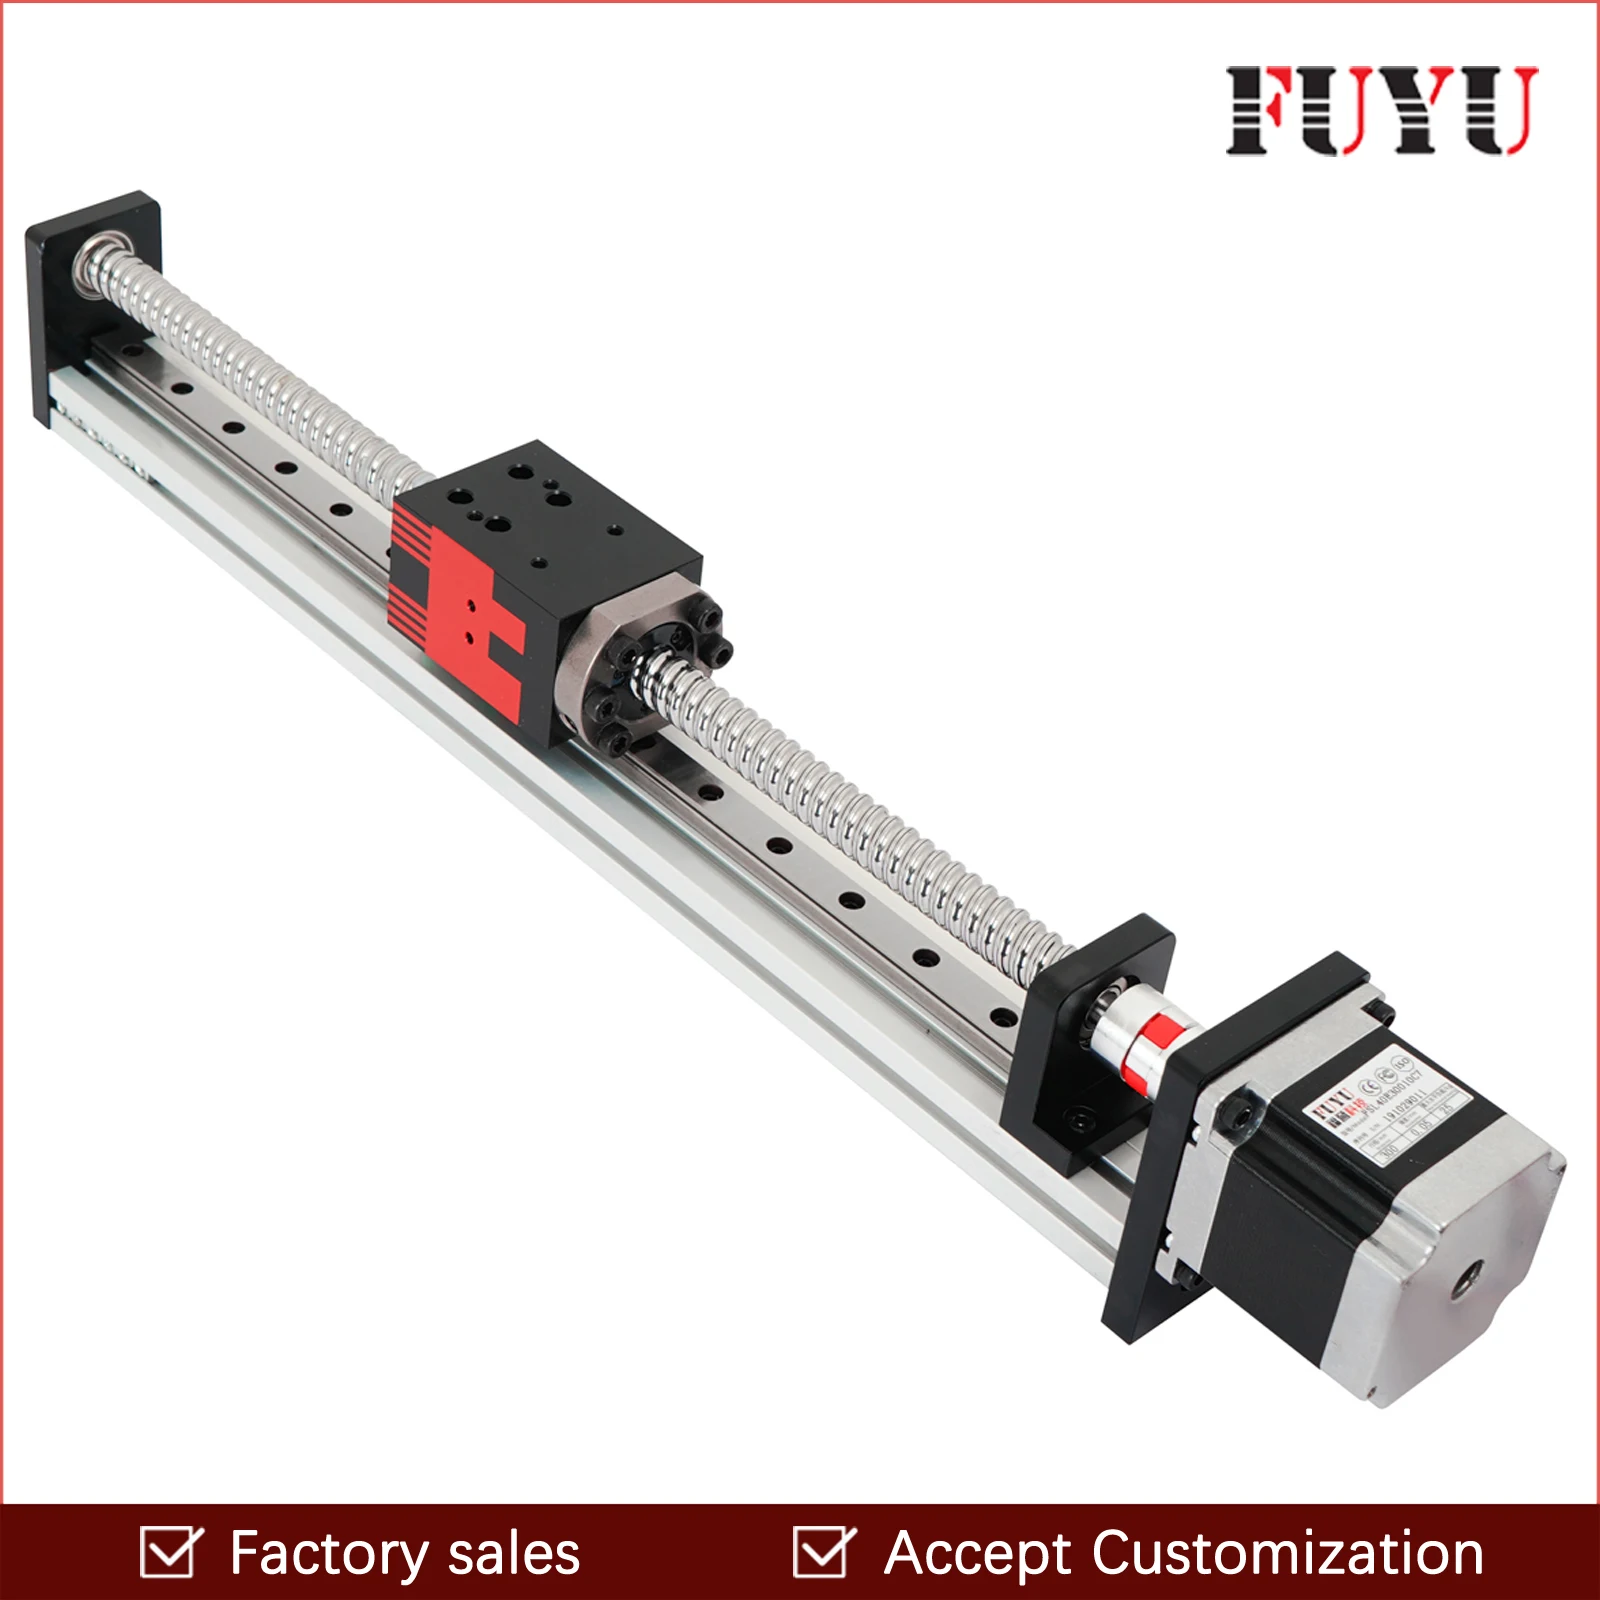 Linear Guide Actuator,500mm Range CNC Linear Guide Rail Slide Stage Ball Screw Guide Actuator Table with 42 Stepper Motor 1610 500mm 